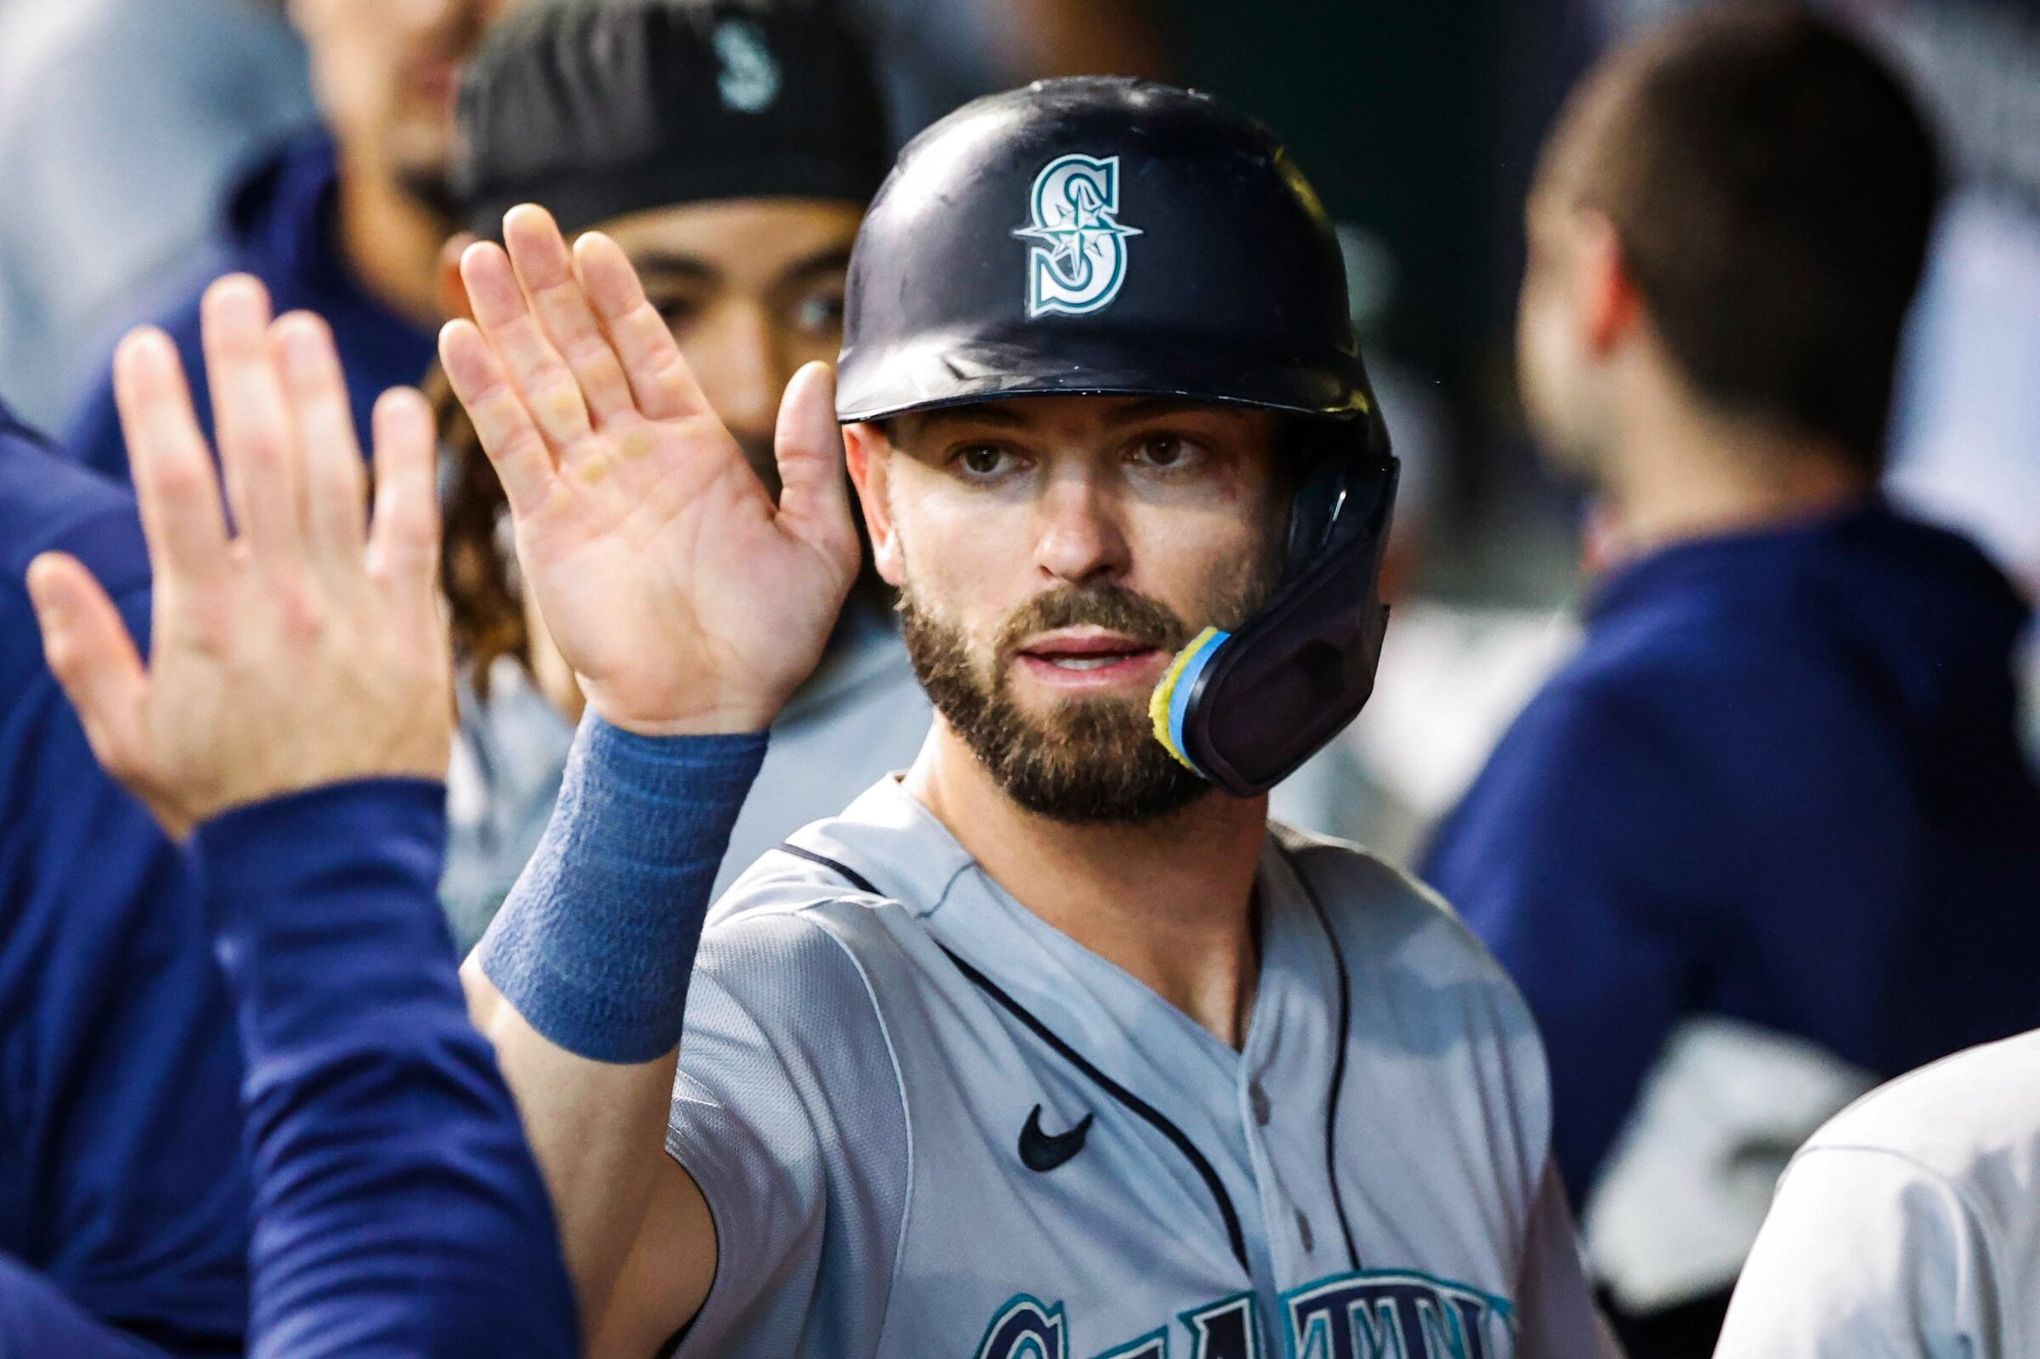 Jake & Stacy: The 4 young Mariners on the hot seat entering 2022